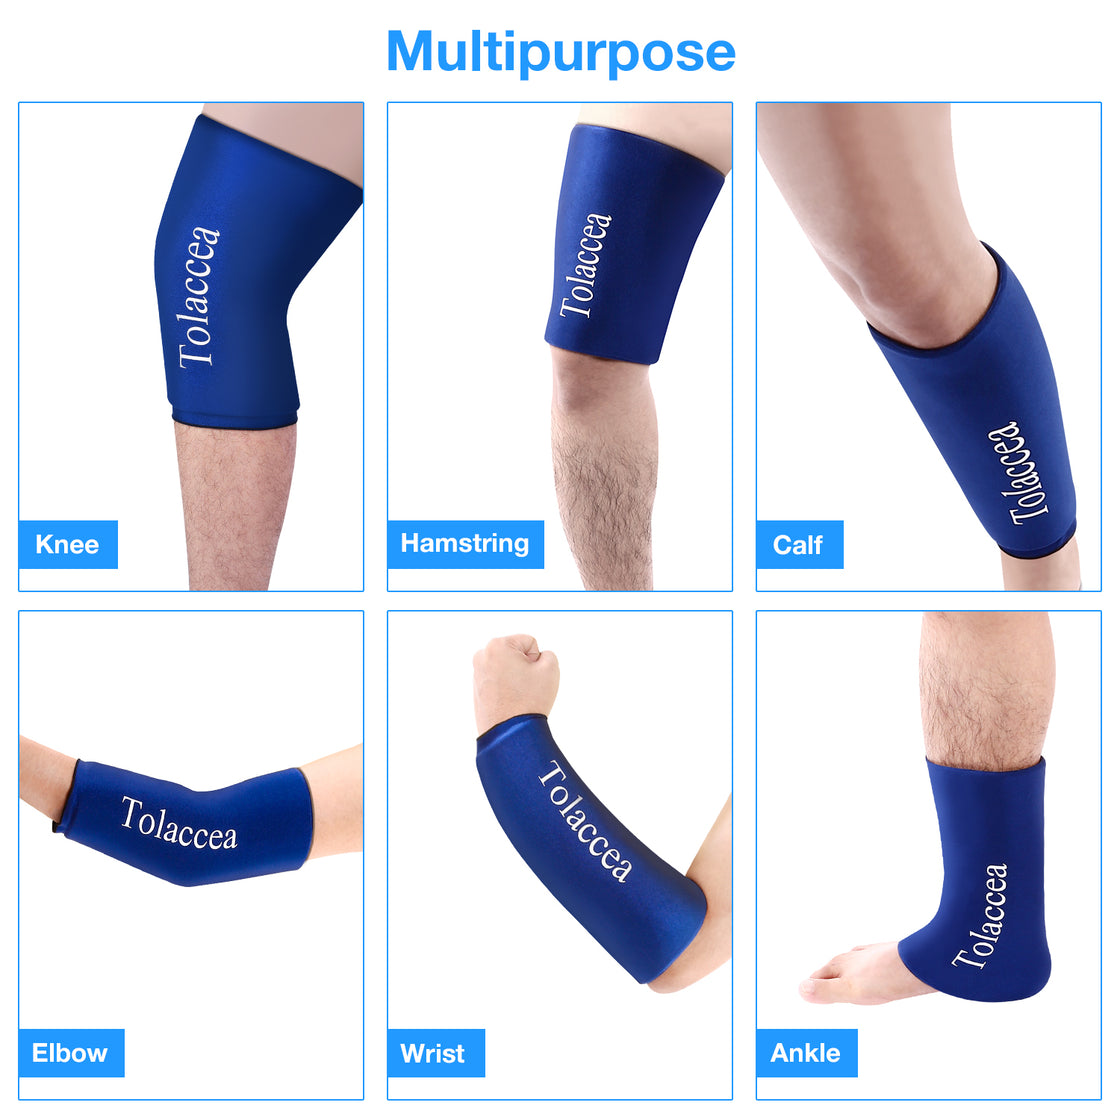 Hot & Cold Therapy Compression Sleeve for Knee Calf Ankle Pain Relief –  Tolaccea